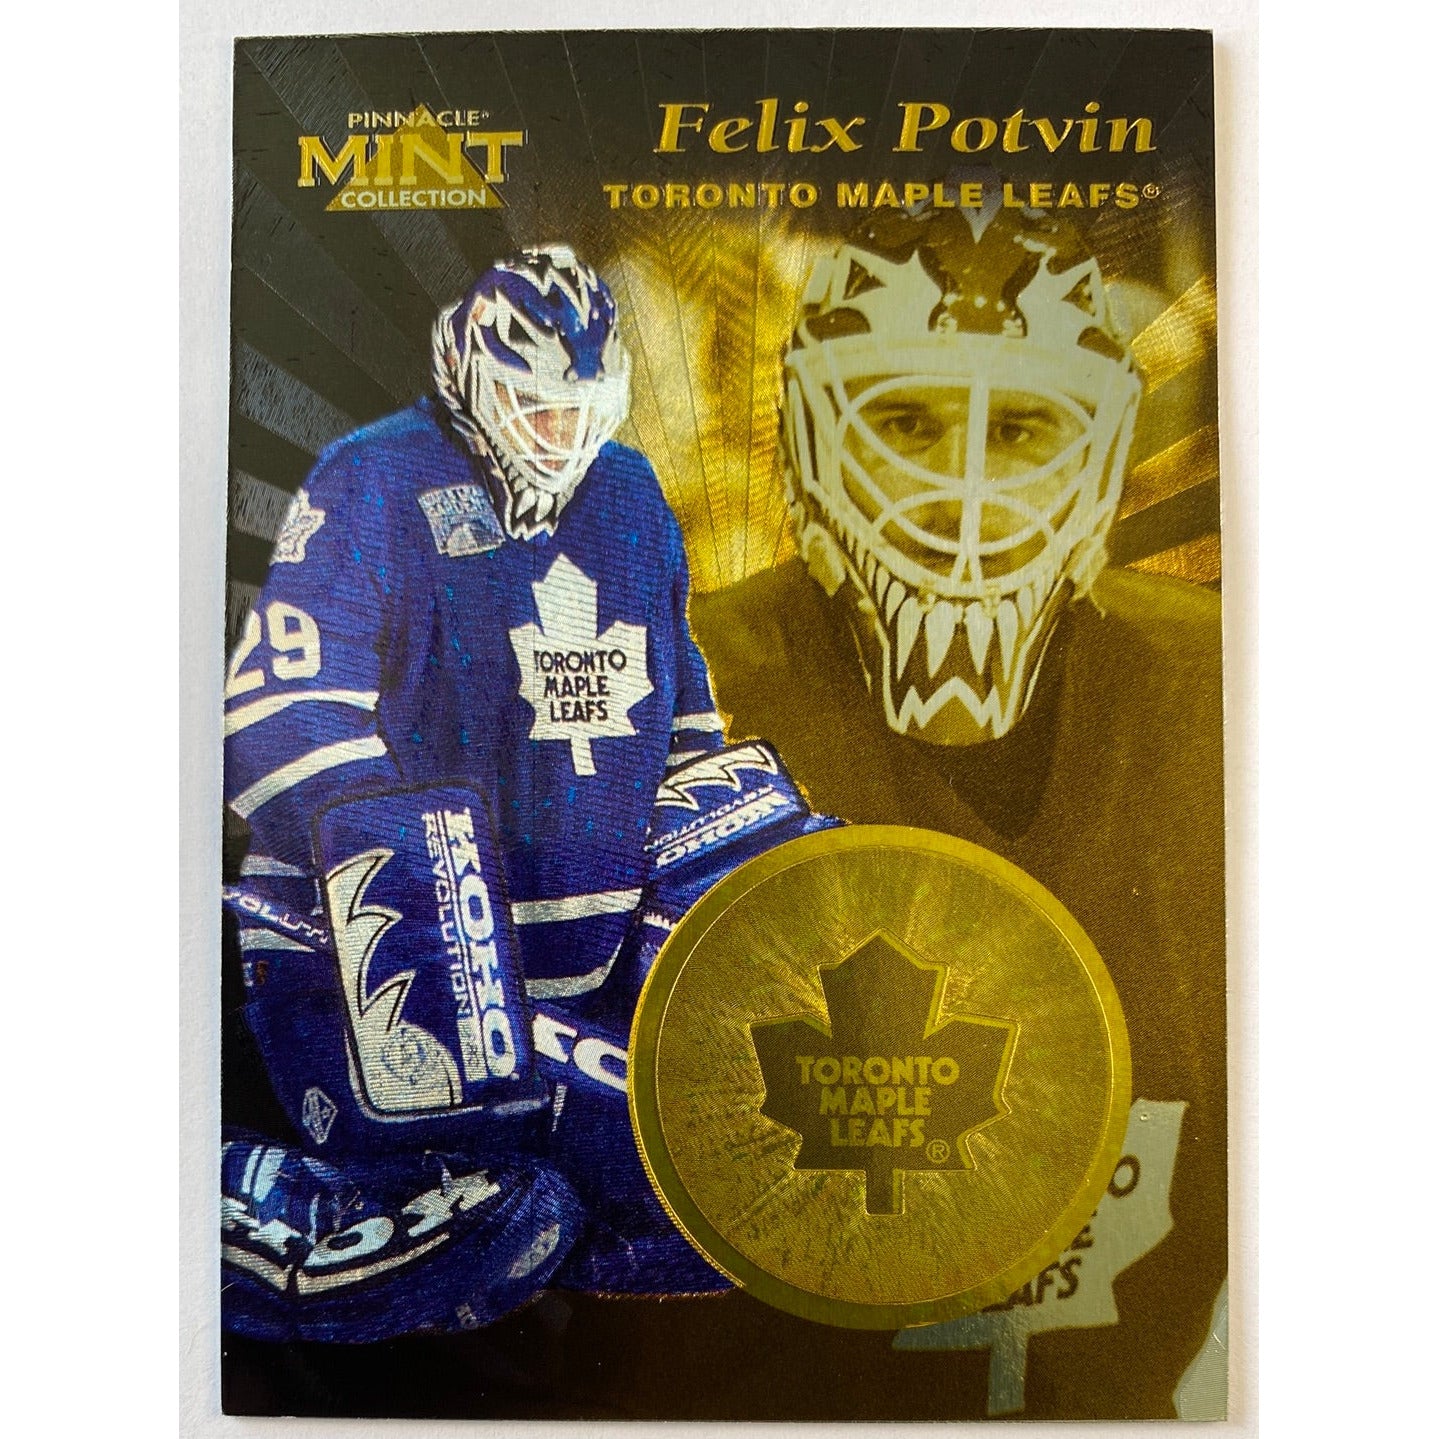 1997-98 Pinnacle Mint Collection Felix “The Cat” Potvin Gold Leafs Coin